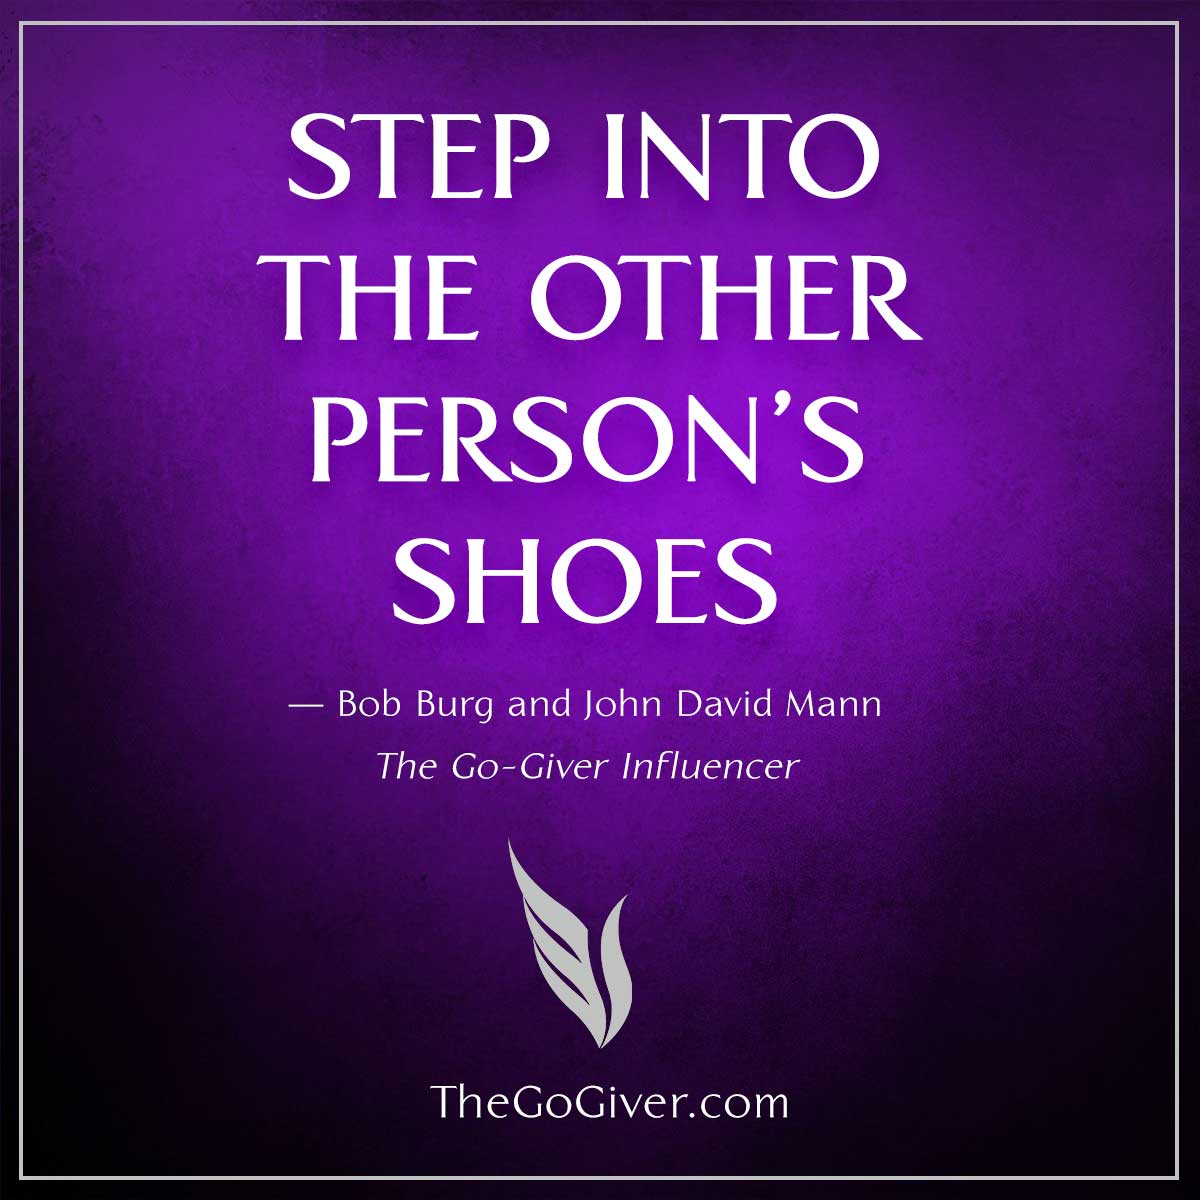 Step into the Other Person's Shoes - The Go-Giver Influencer